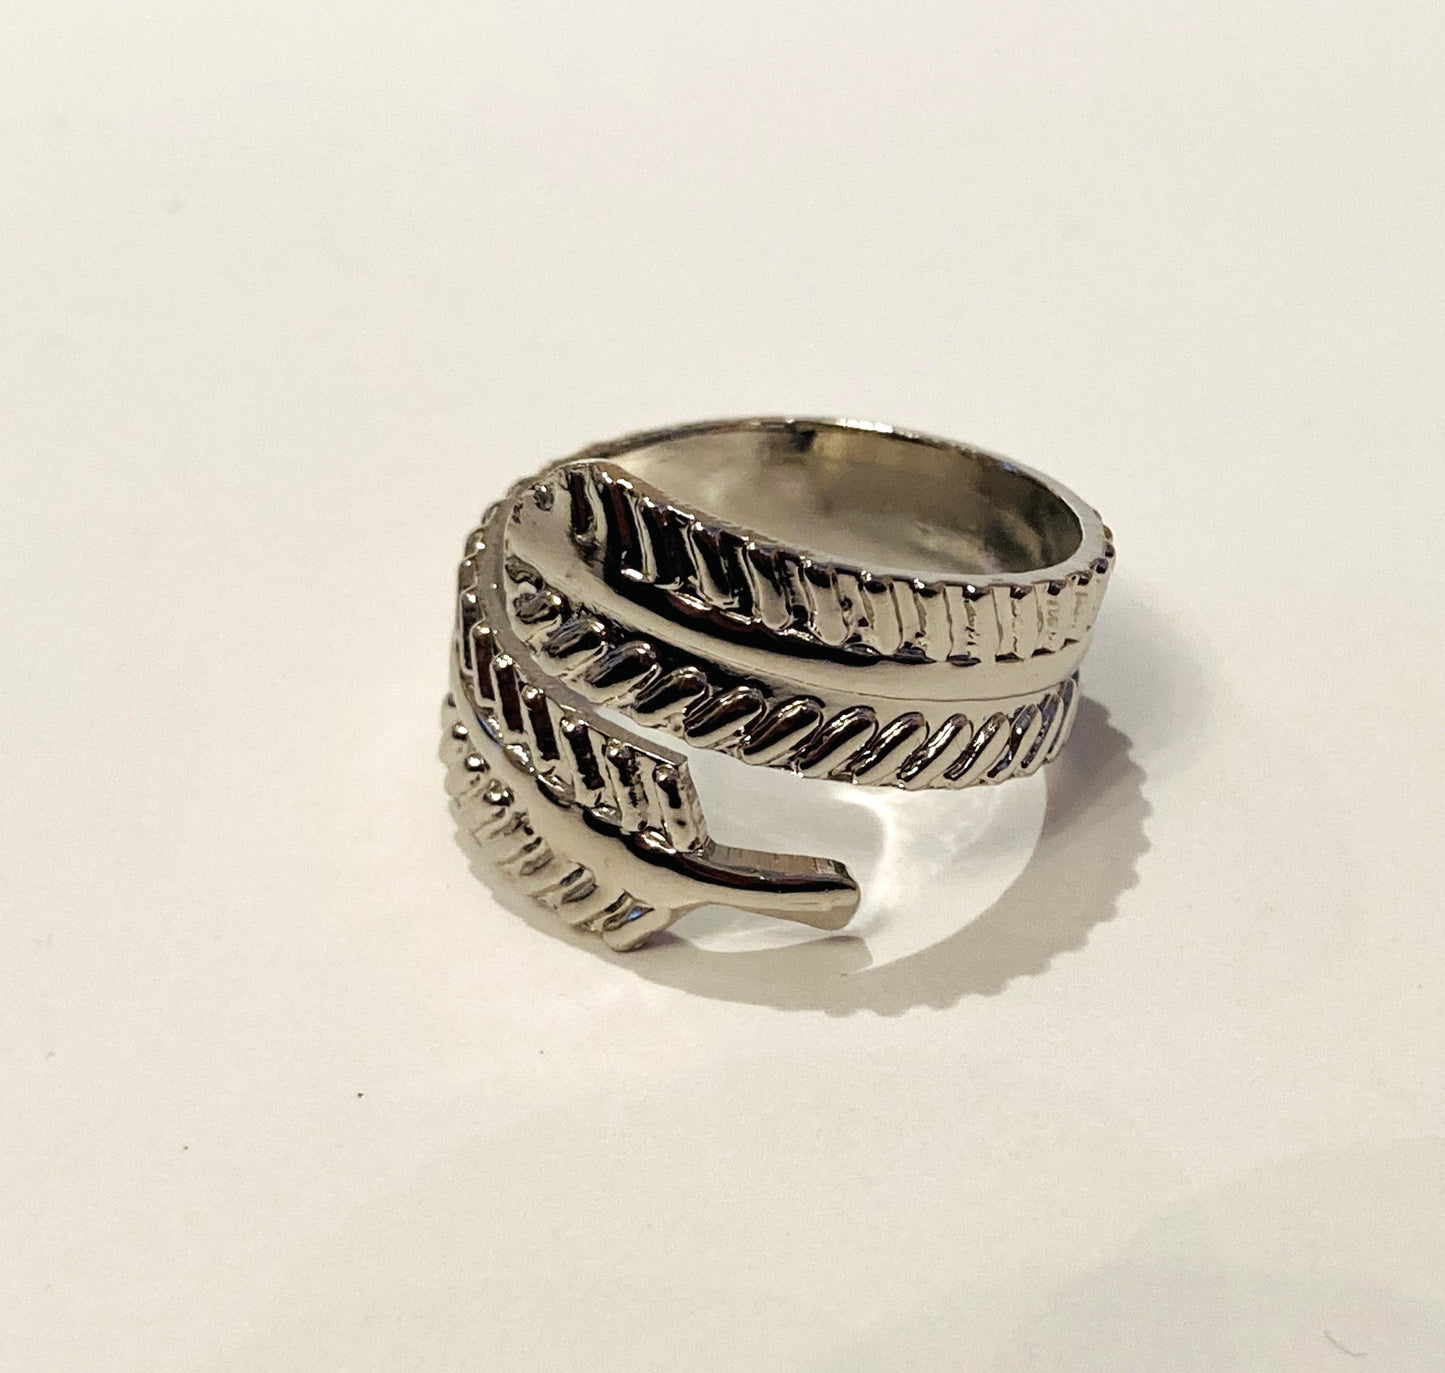 Handmade Brass Ring Plated with Chrome - Leaves